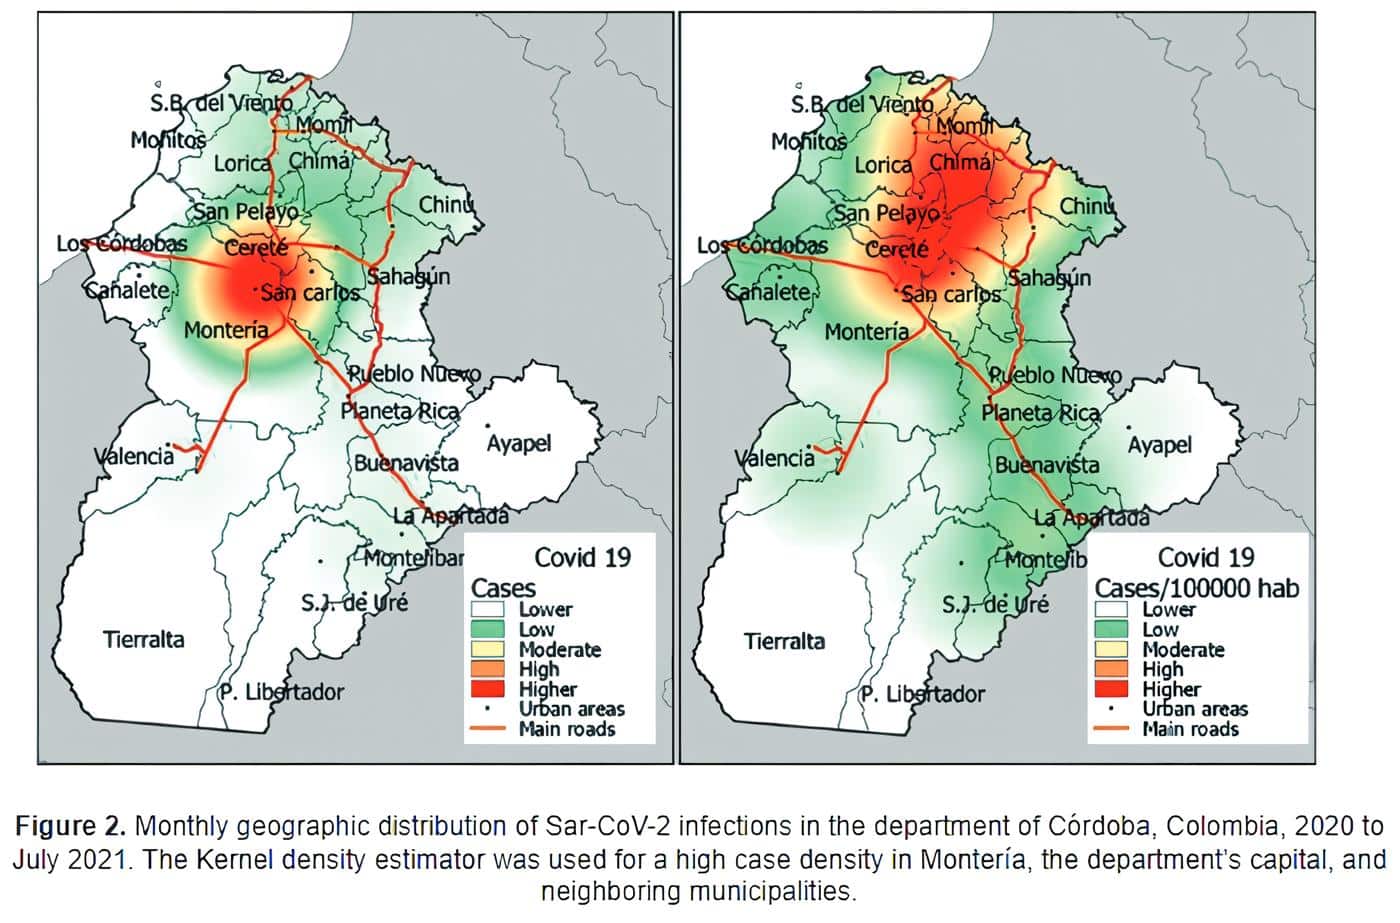 Monthly geographic distribution of Sar-CoV-2 infections in the department of Córdoba